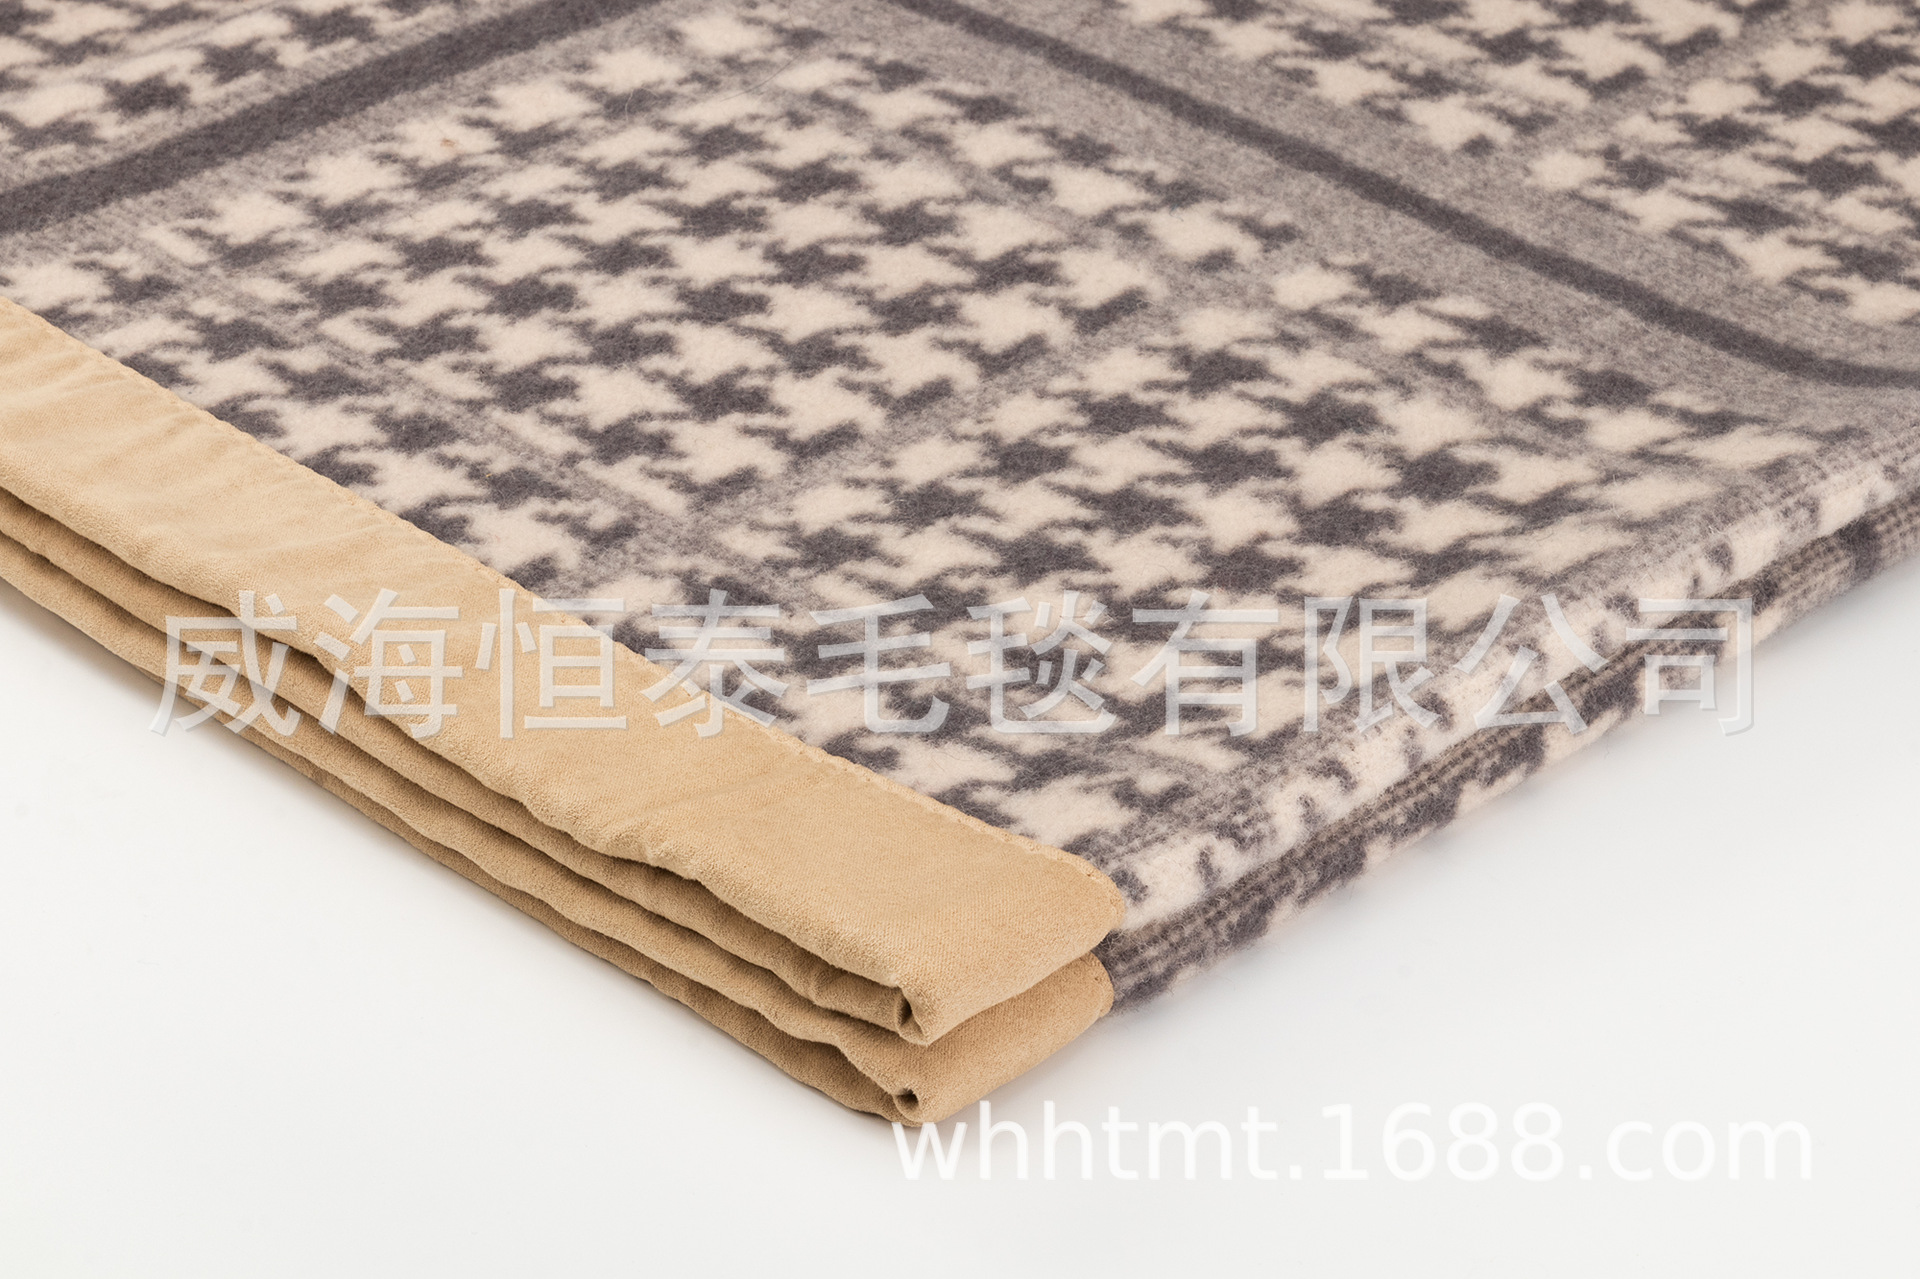 Factory Self-Operated Processing New Houndstooth Blanket Wool Suede Edge Warm Fashion